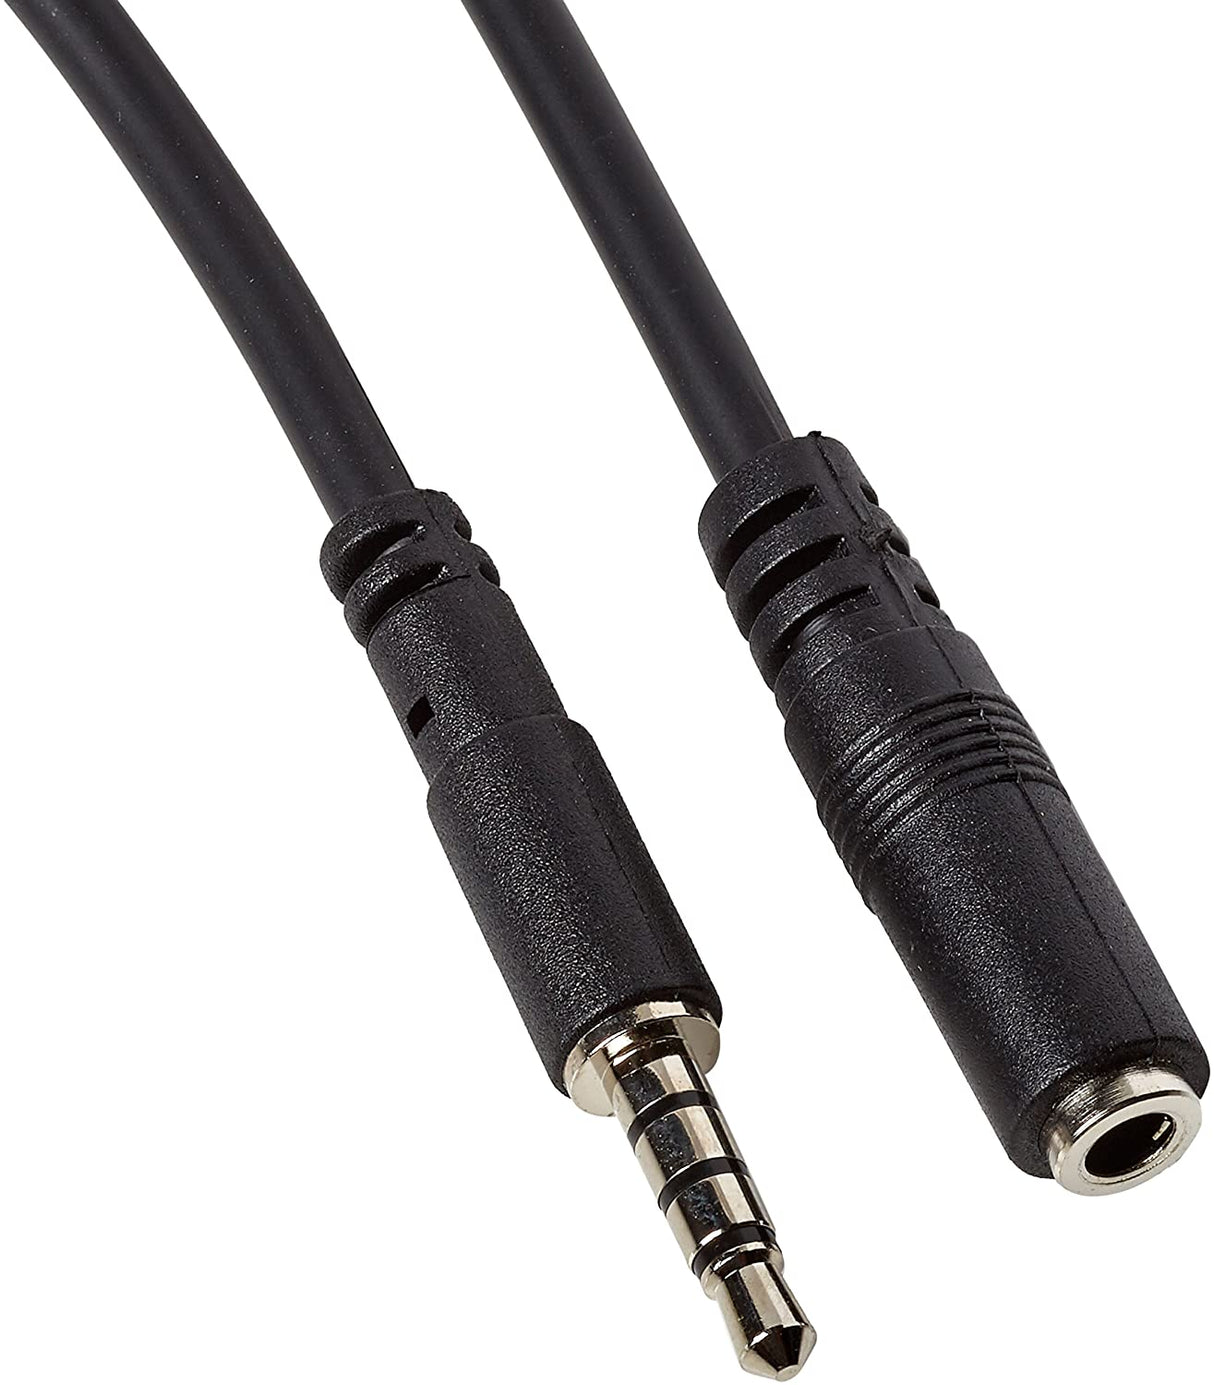 StarTech.com 2m 3.5mm 4 Position TRRS Headset Extension Cable - M/F - audio Extension Cable for iPhone (MUHSMF2M) 6 ft / 2m Cable